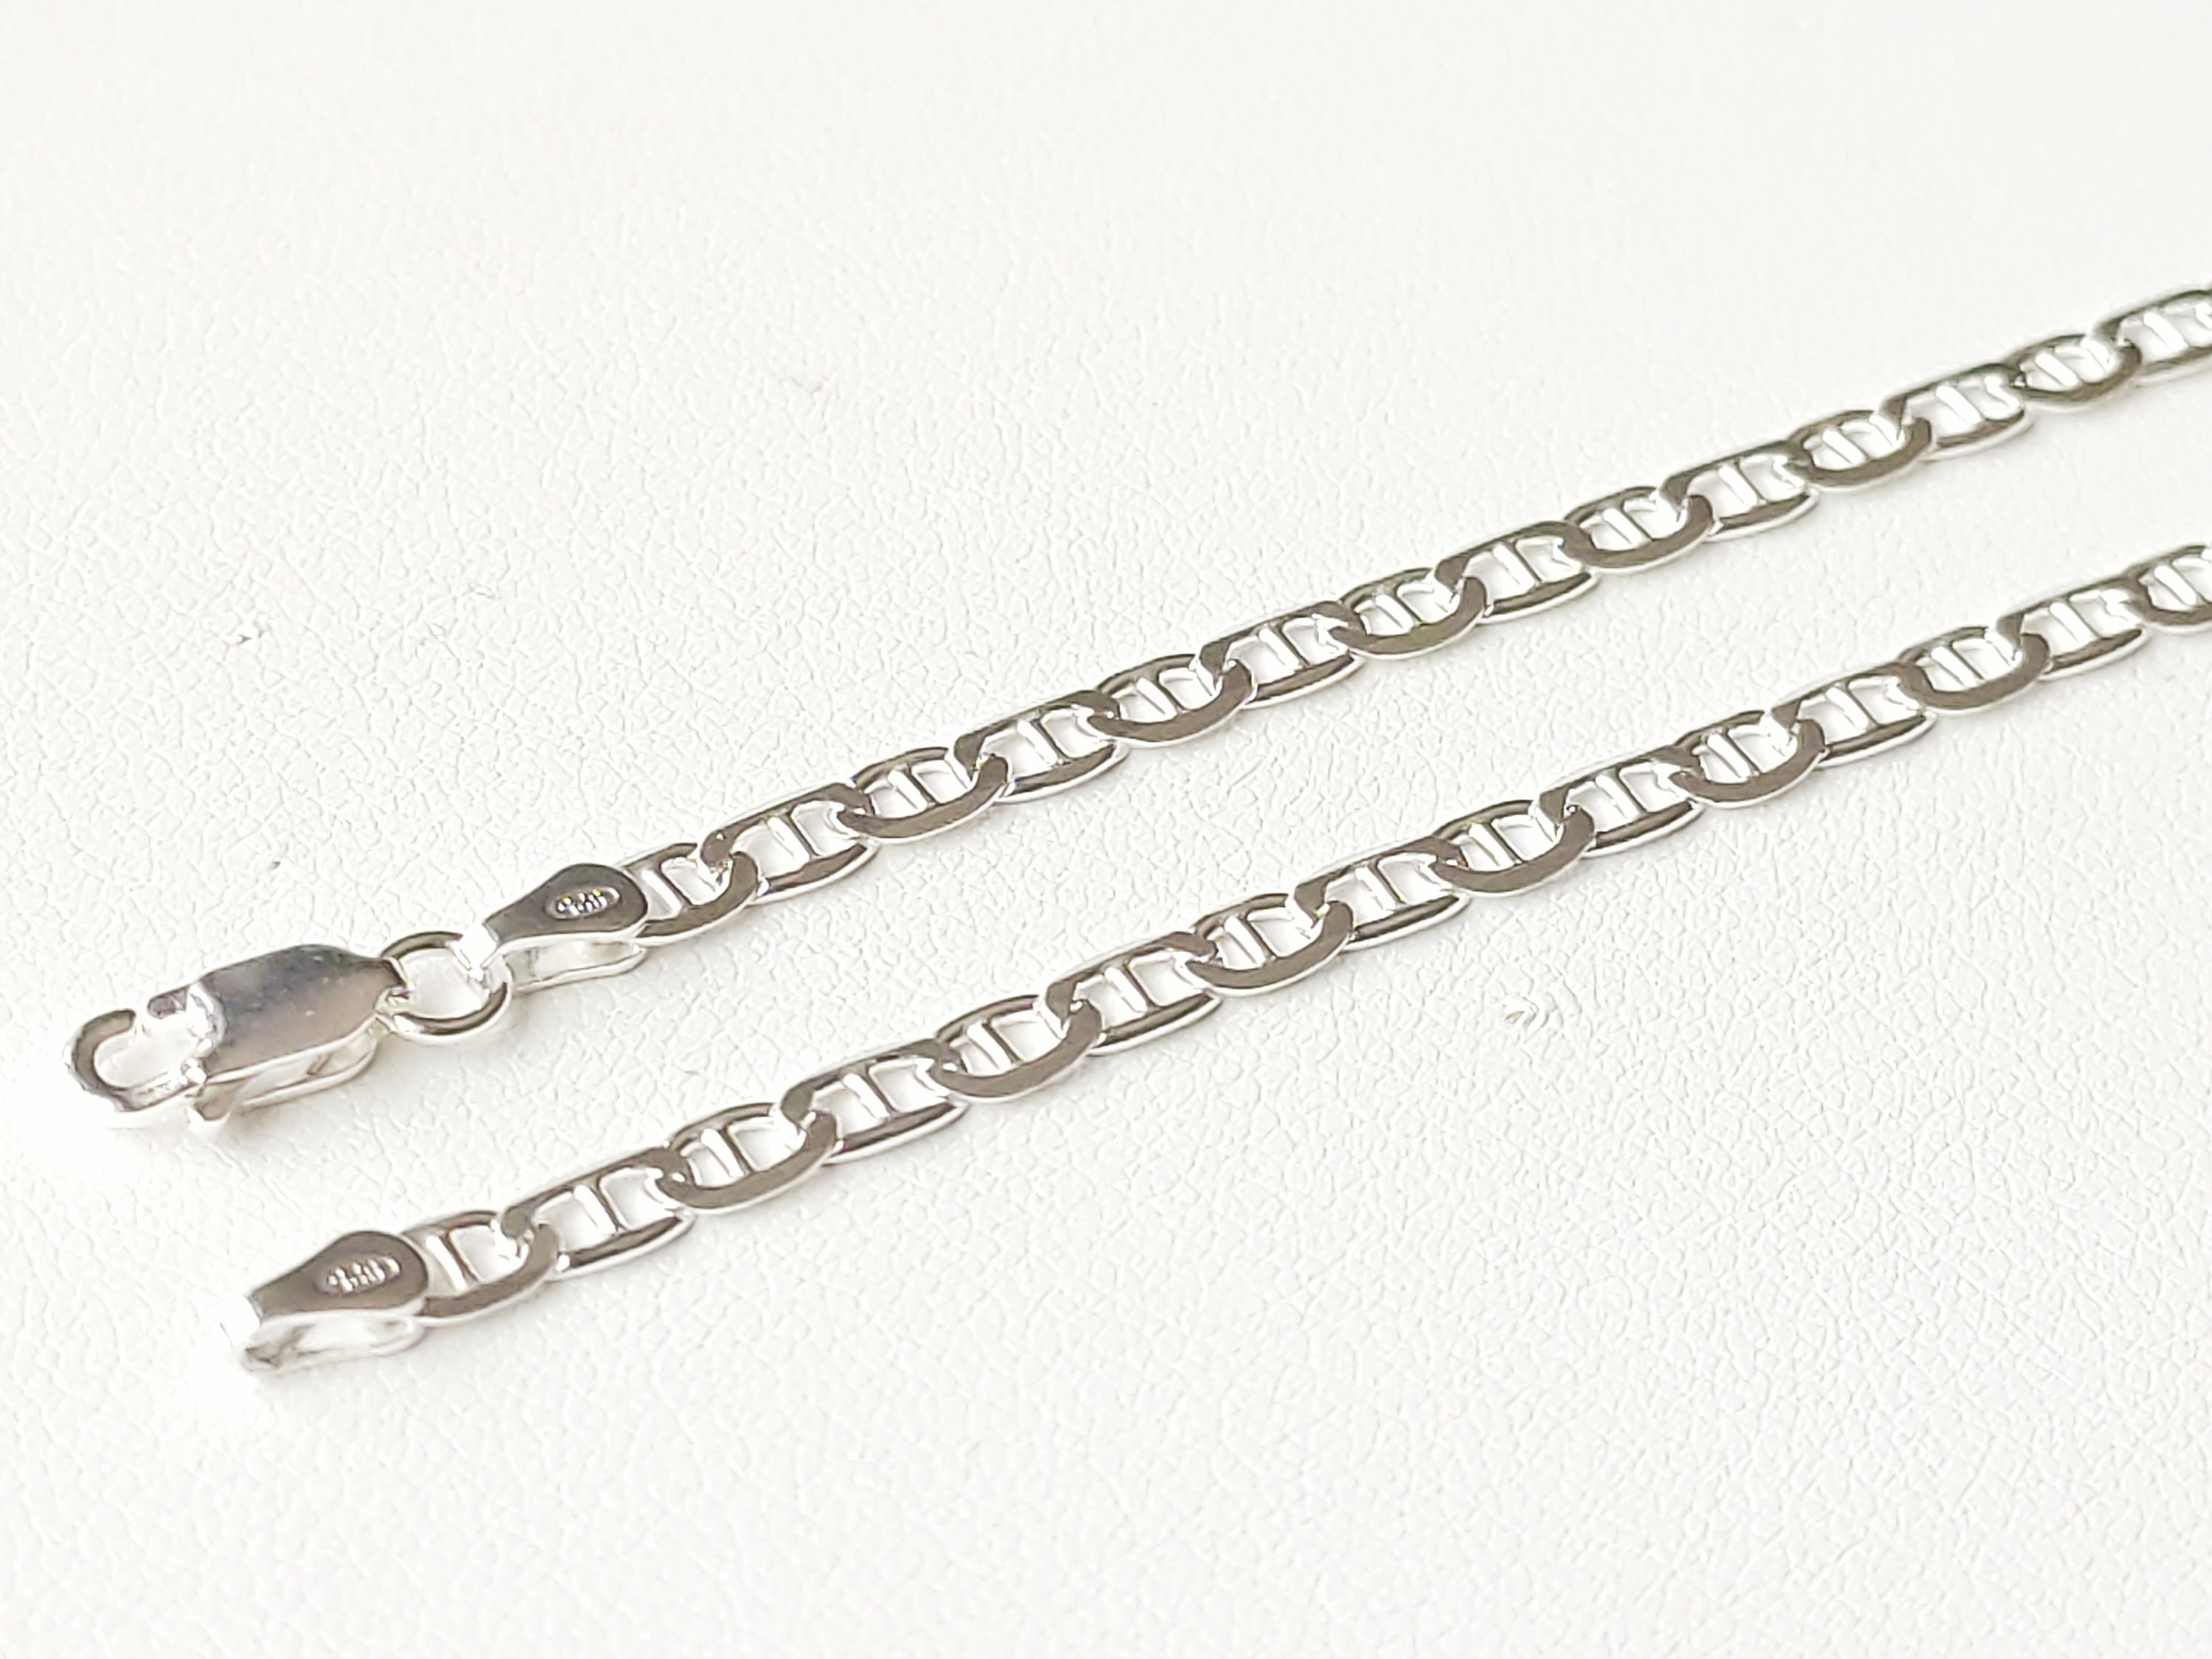 Thin Silver Snake Chain Necklace, Mens Silver Necklace Chain - Round Silver Chain for Men - Minimalist Jewelry - by Twistedpendant